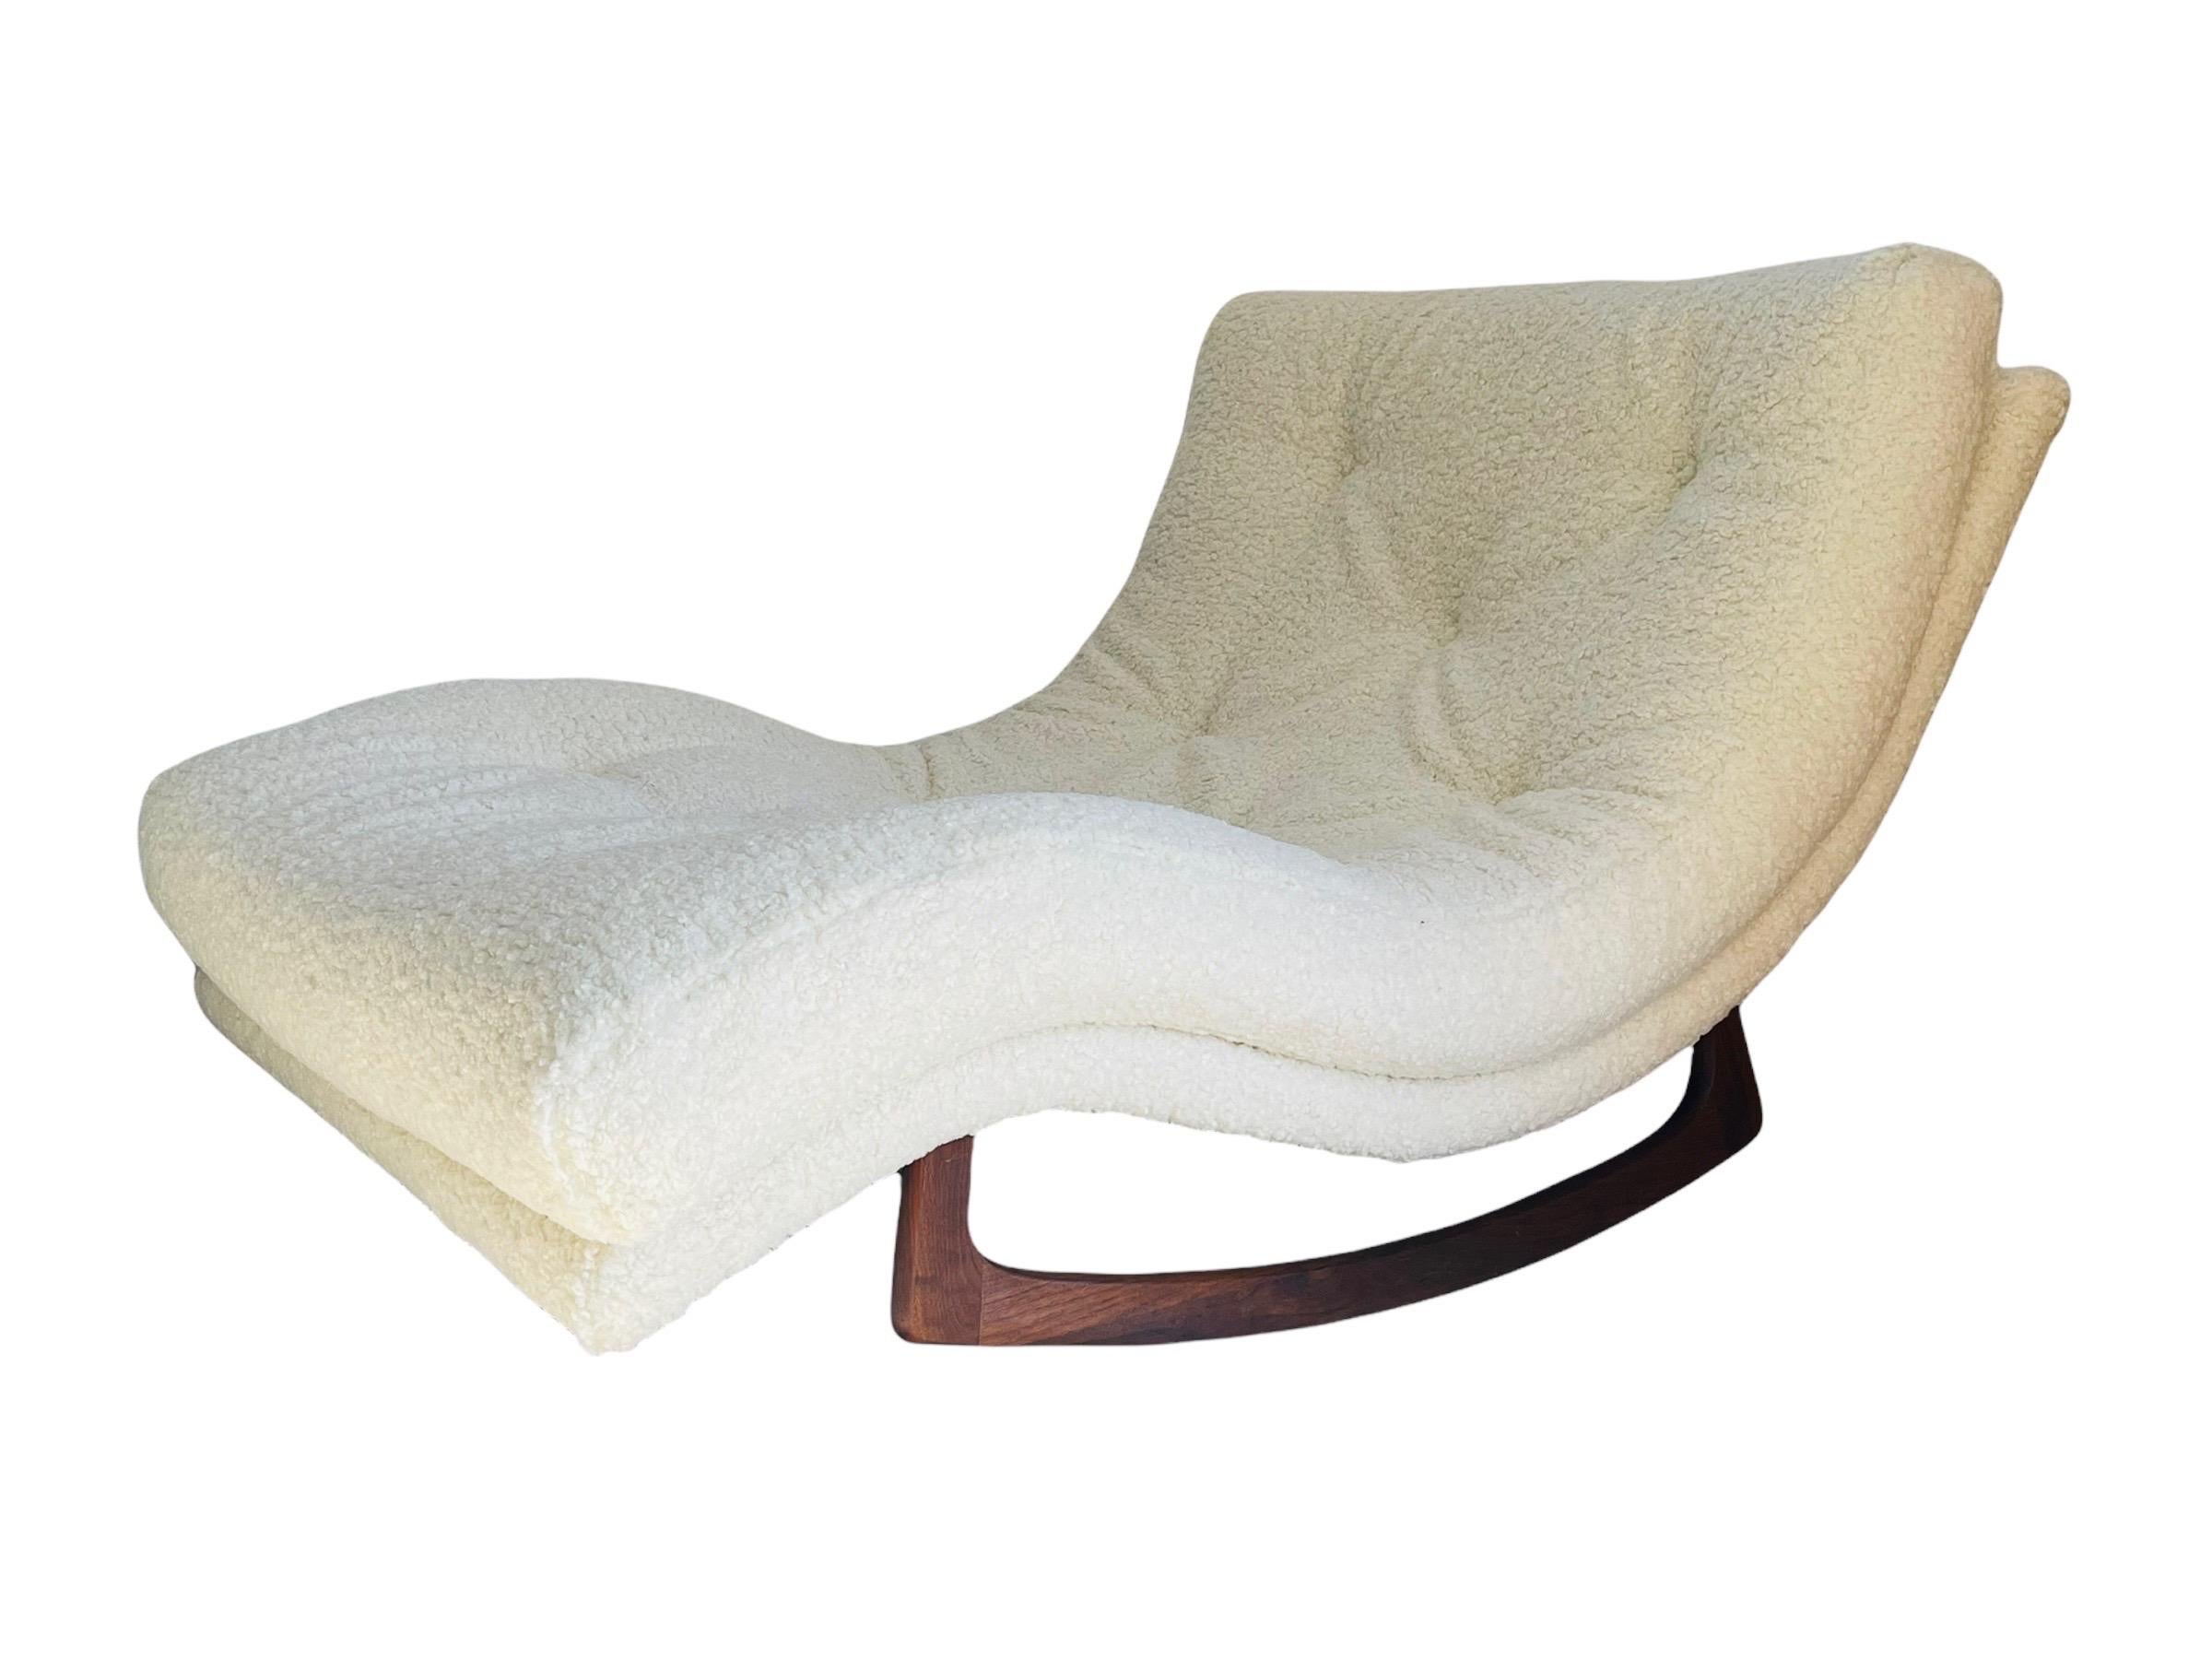 Stunning Adrian Pearsall rocking wave lounge chaise/chair fully restored and reupholstered in Boucle fabric. This iconic lounger is the ultimate lounge chair and would make a great addition to any living room or bedroom. Perfect chair to read a book